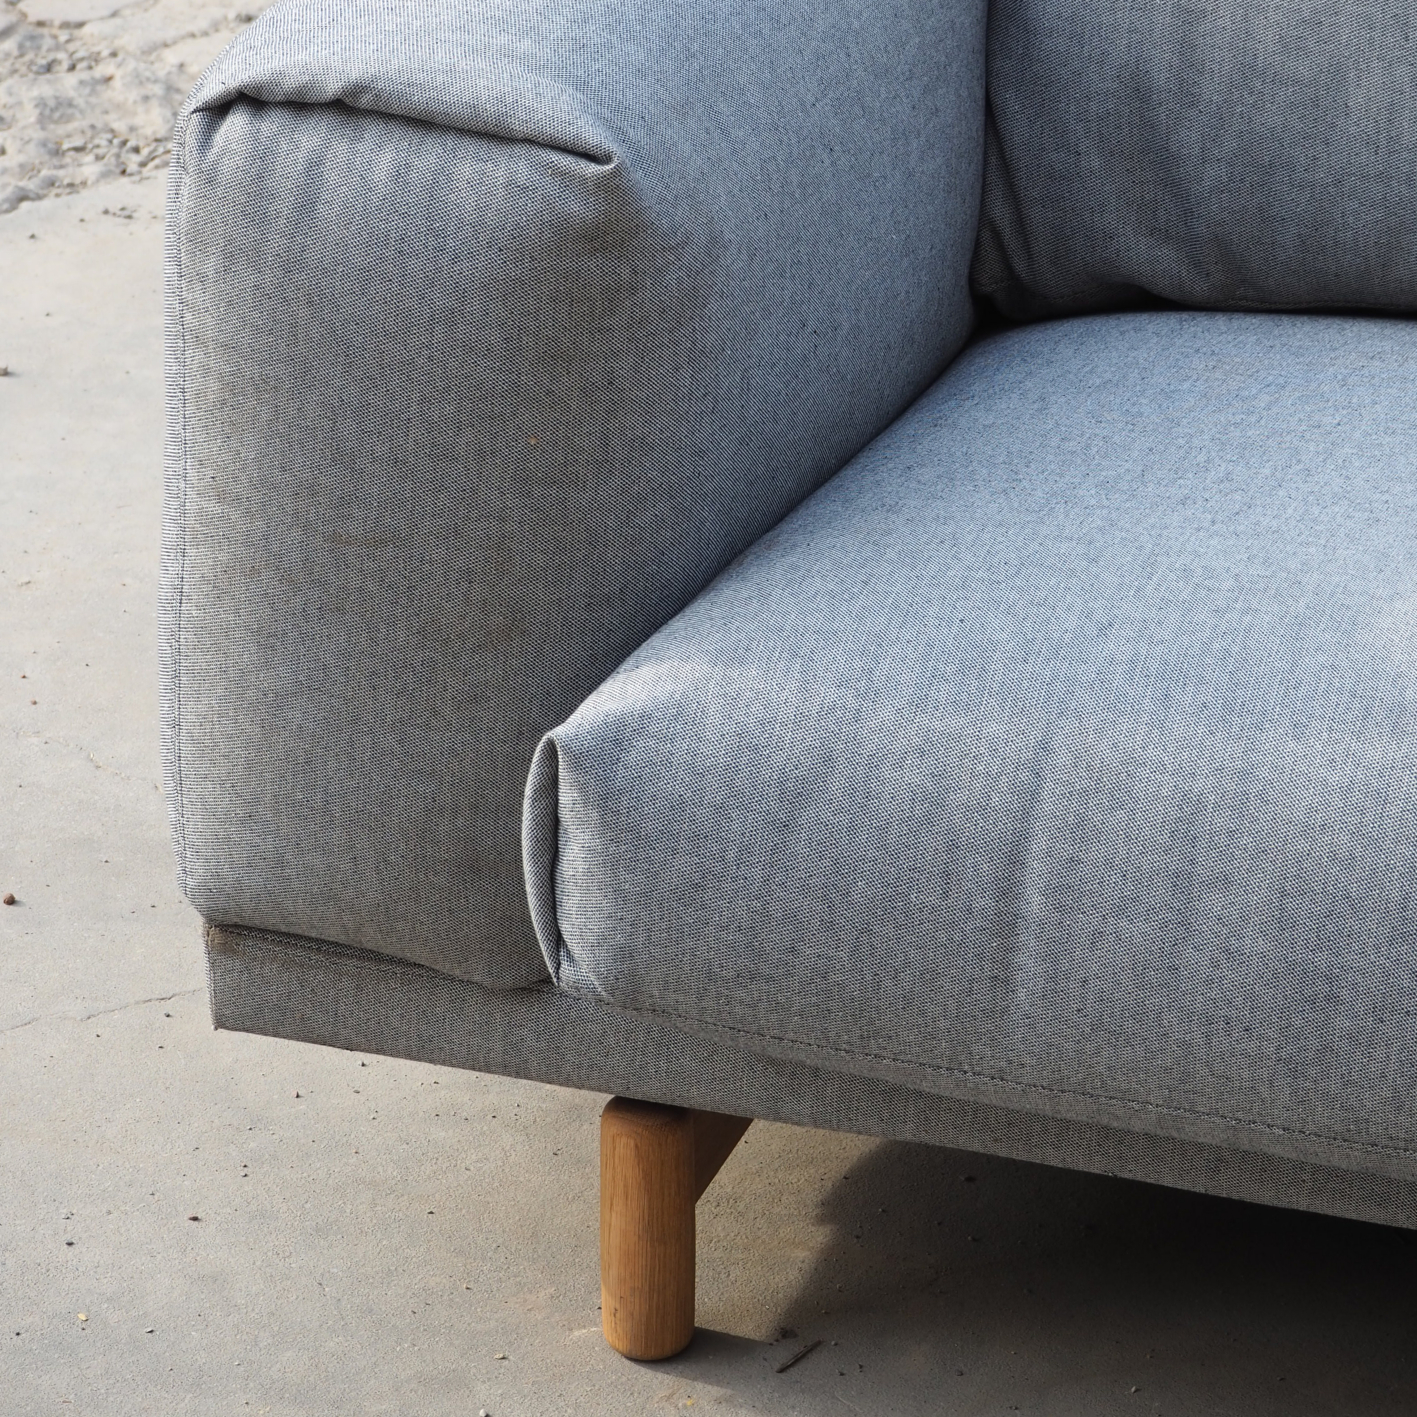 Large sofa 'Rest' by Anderssen &amp; Voll for Knoll (Muuto)